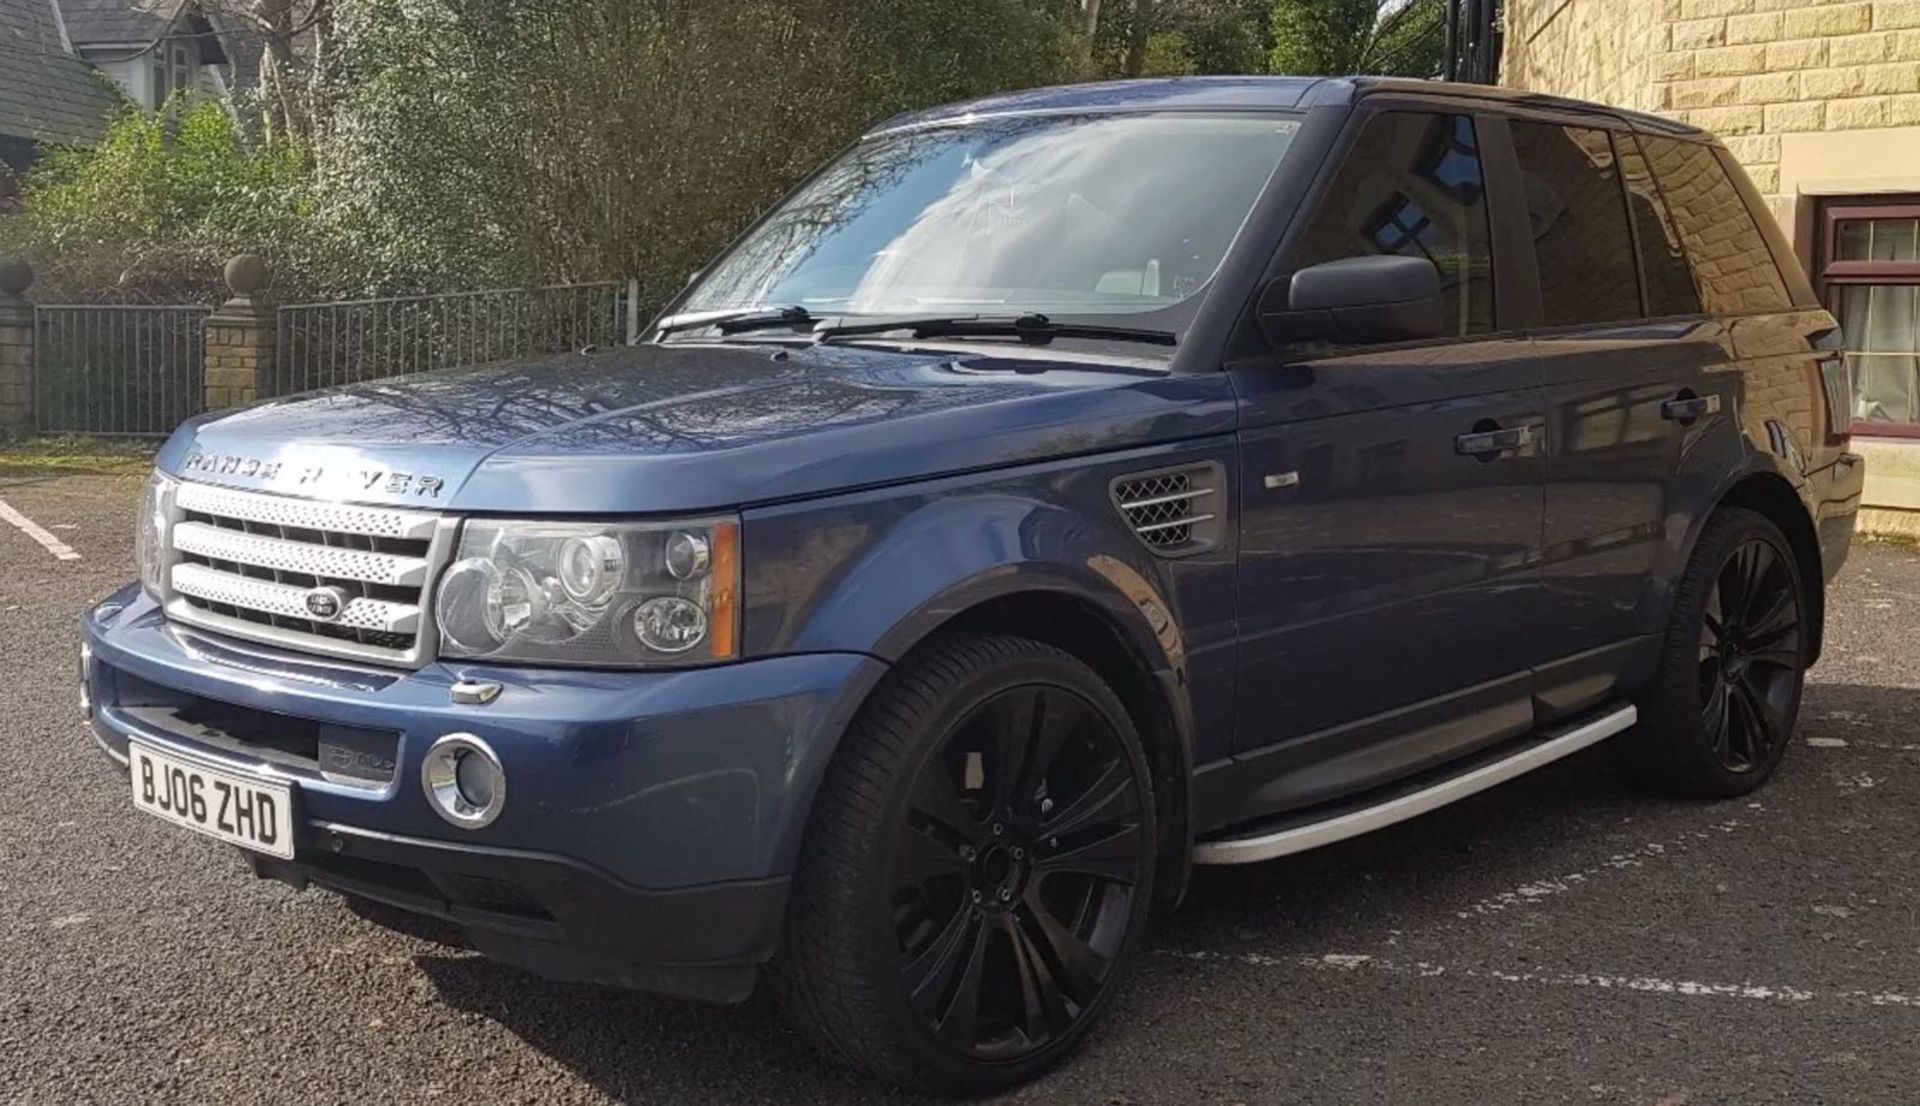 2006/06 REG LAND ROVER RANGE ROVER SPORT V8 SUPER CHARGED STD AUTOMATIC